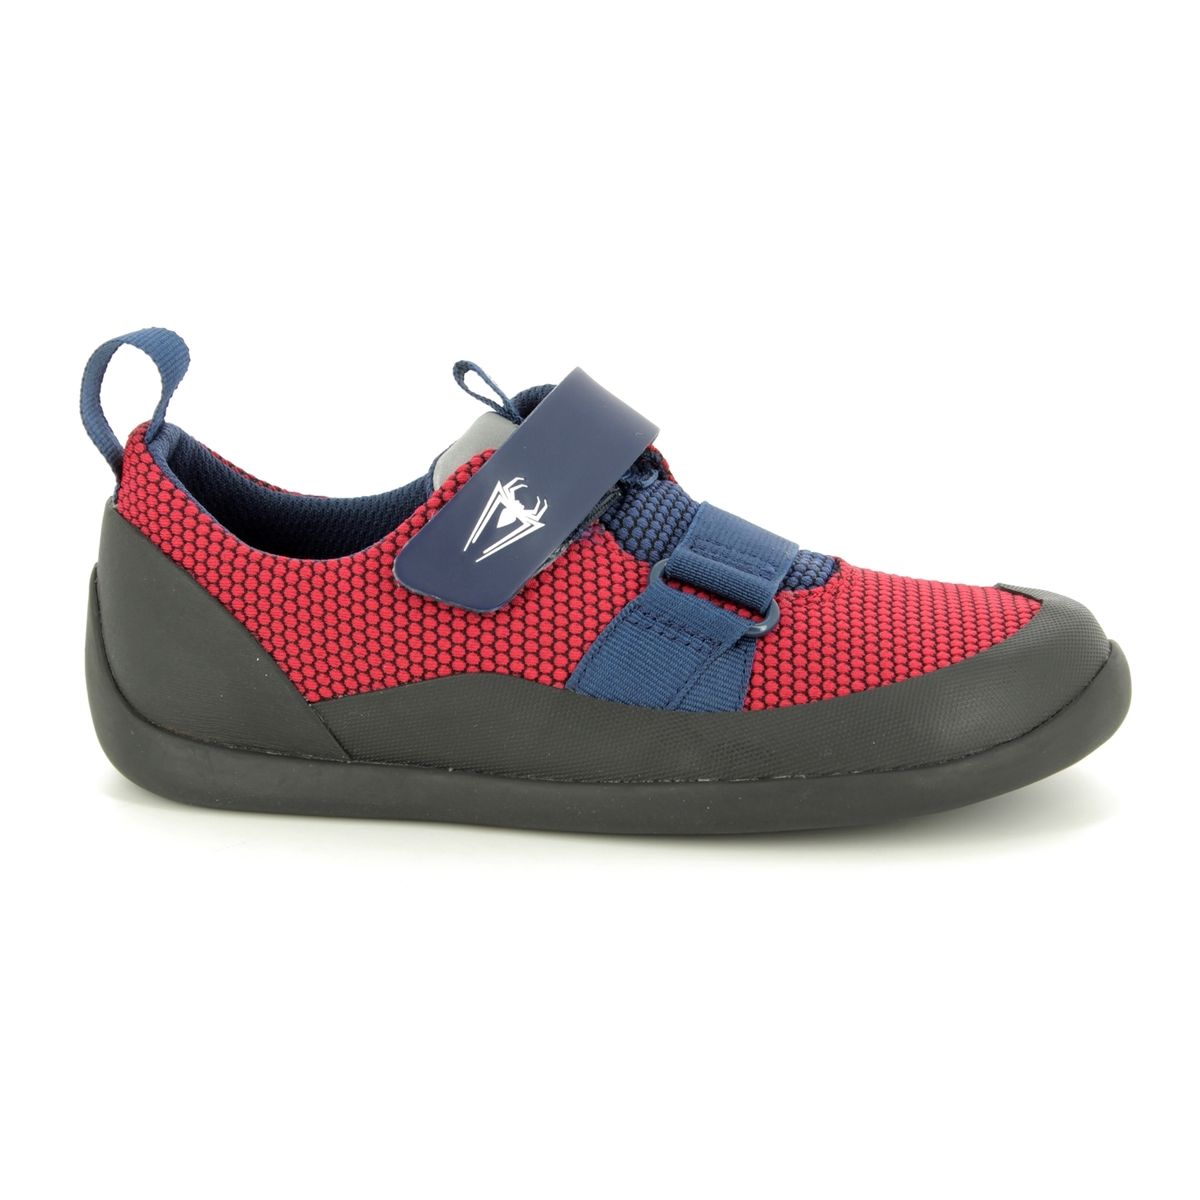 clarks spiderman shoes